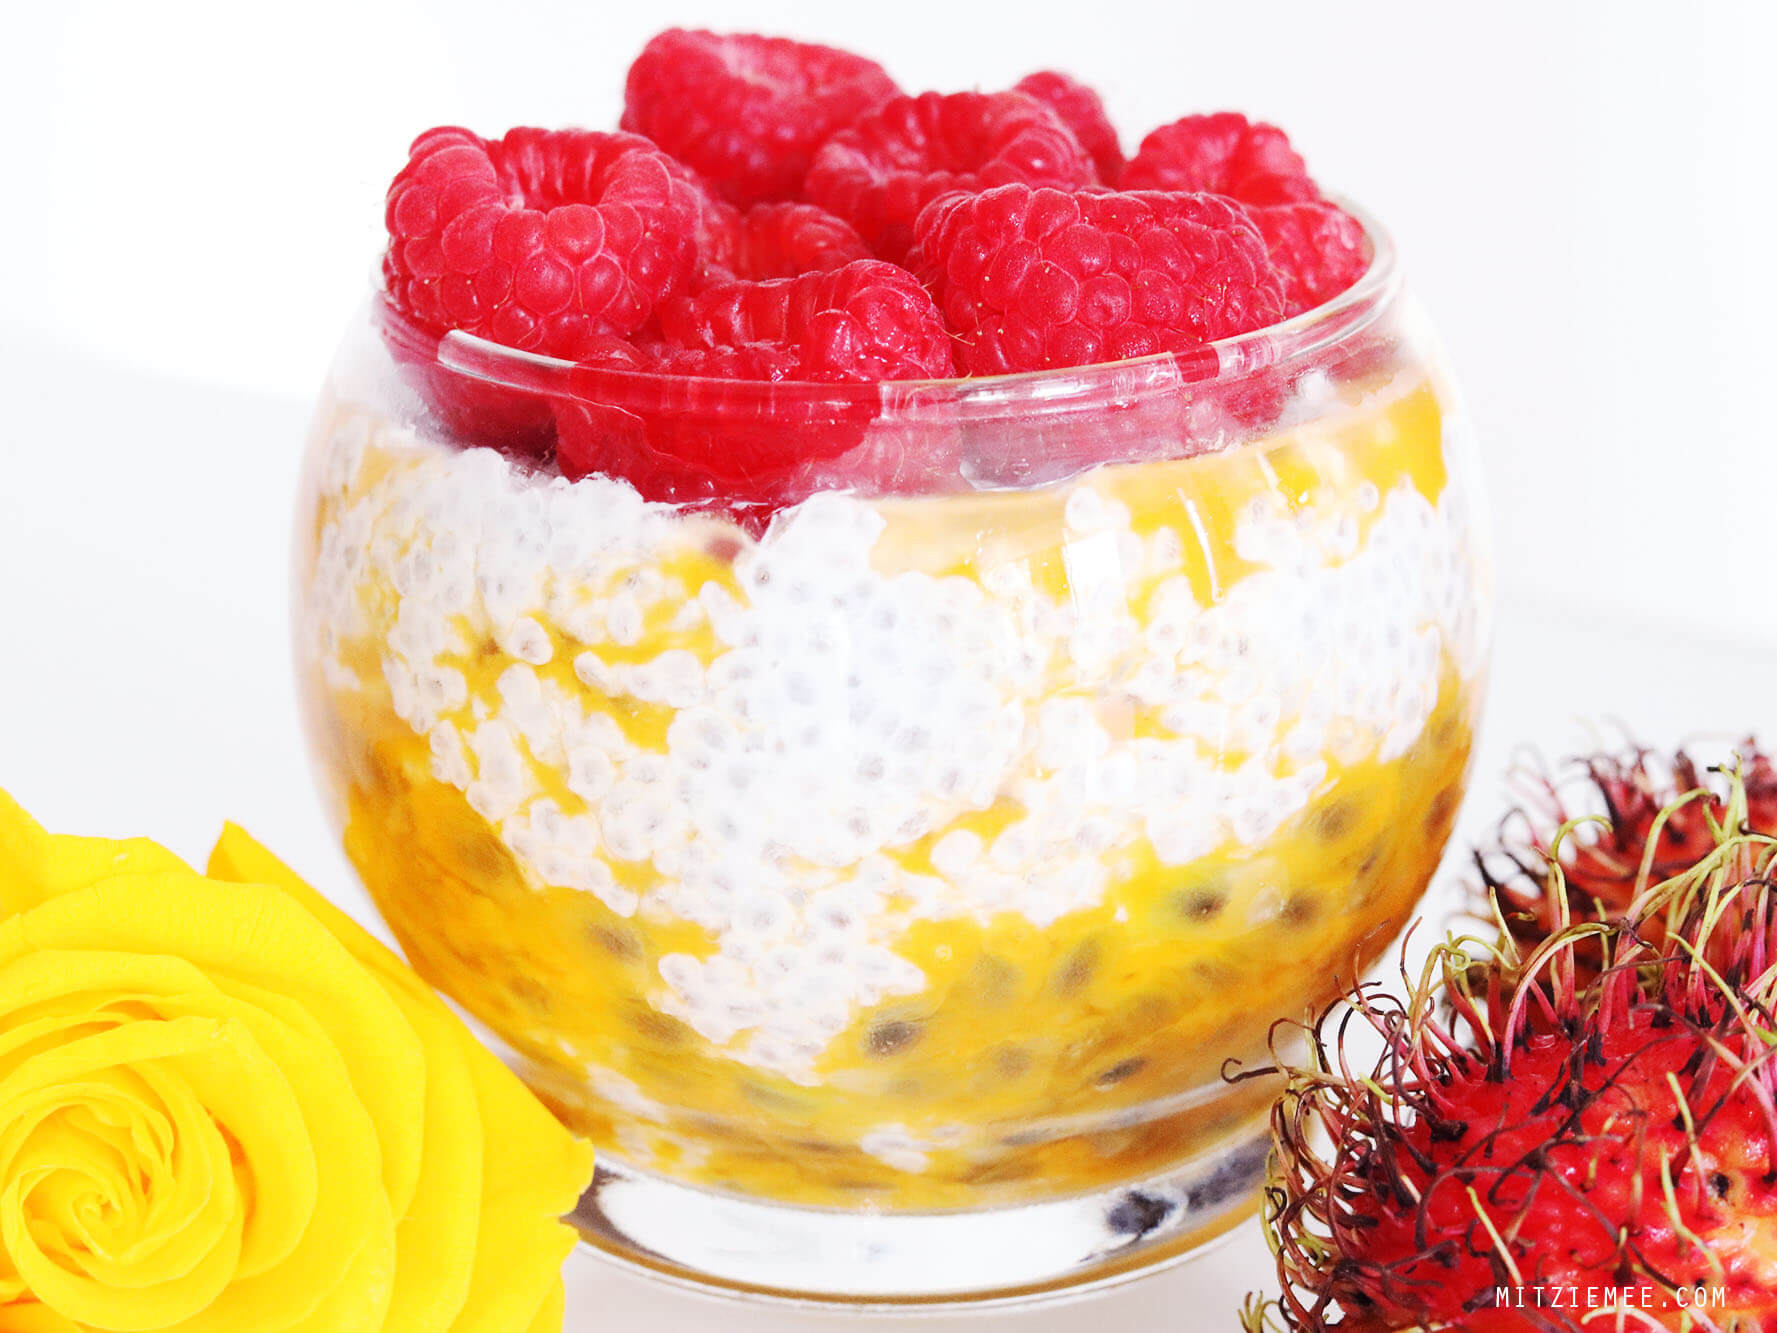 Chia pudding with passion fruit topping